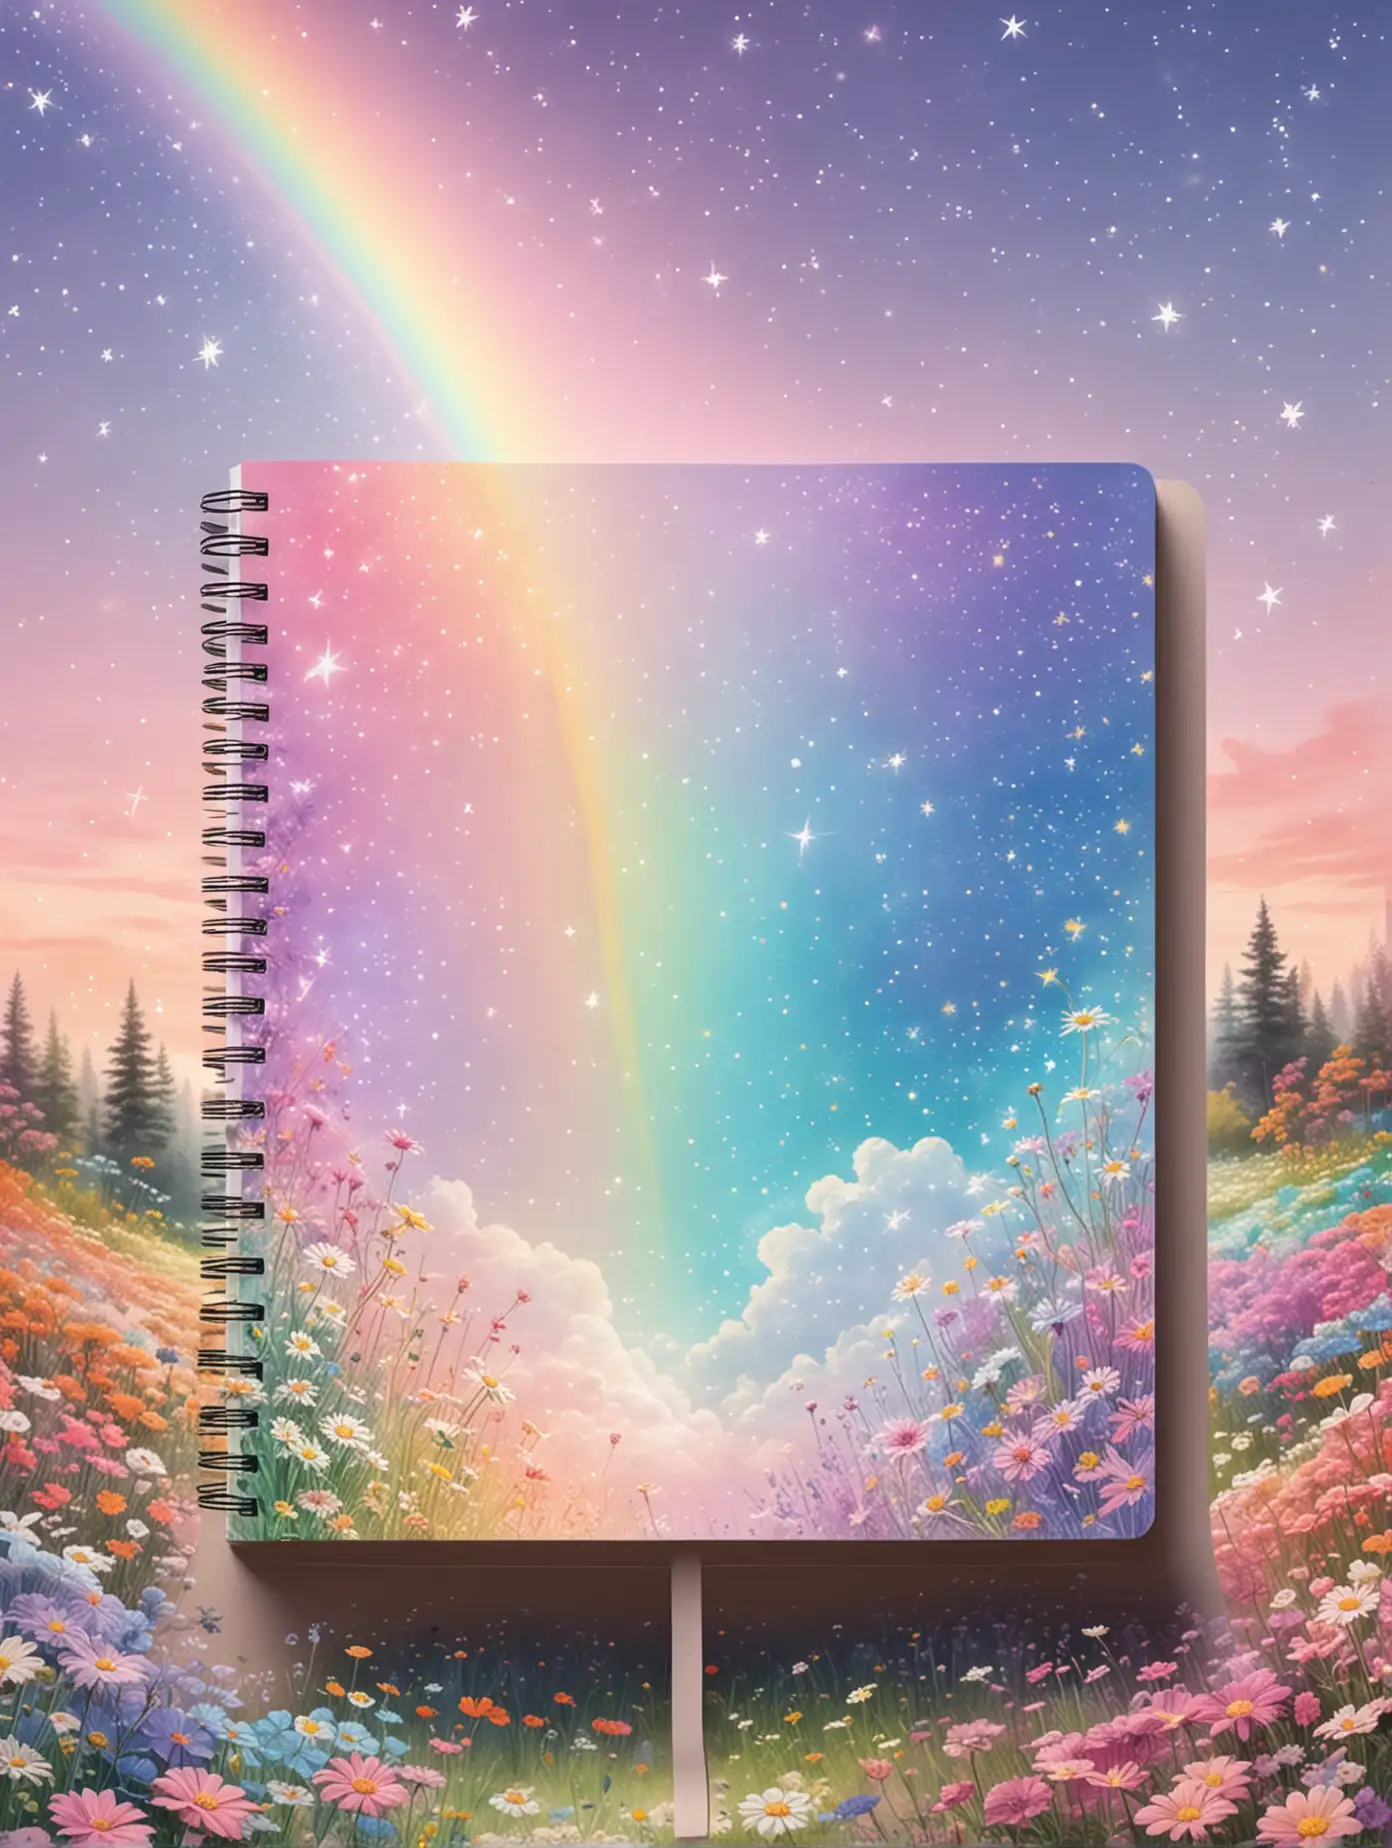 A notebook in a pastel rainbow garden on earth, that opens a portal to a bright white and rainbow magical starry sky